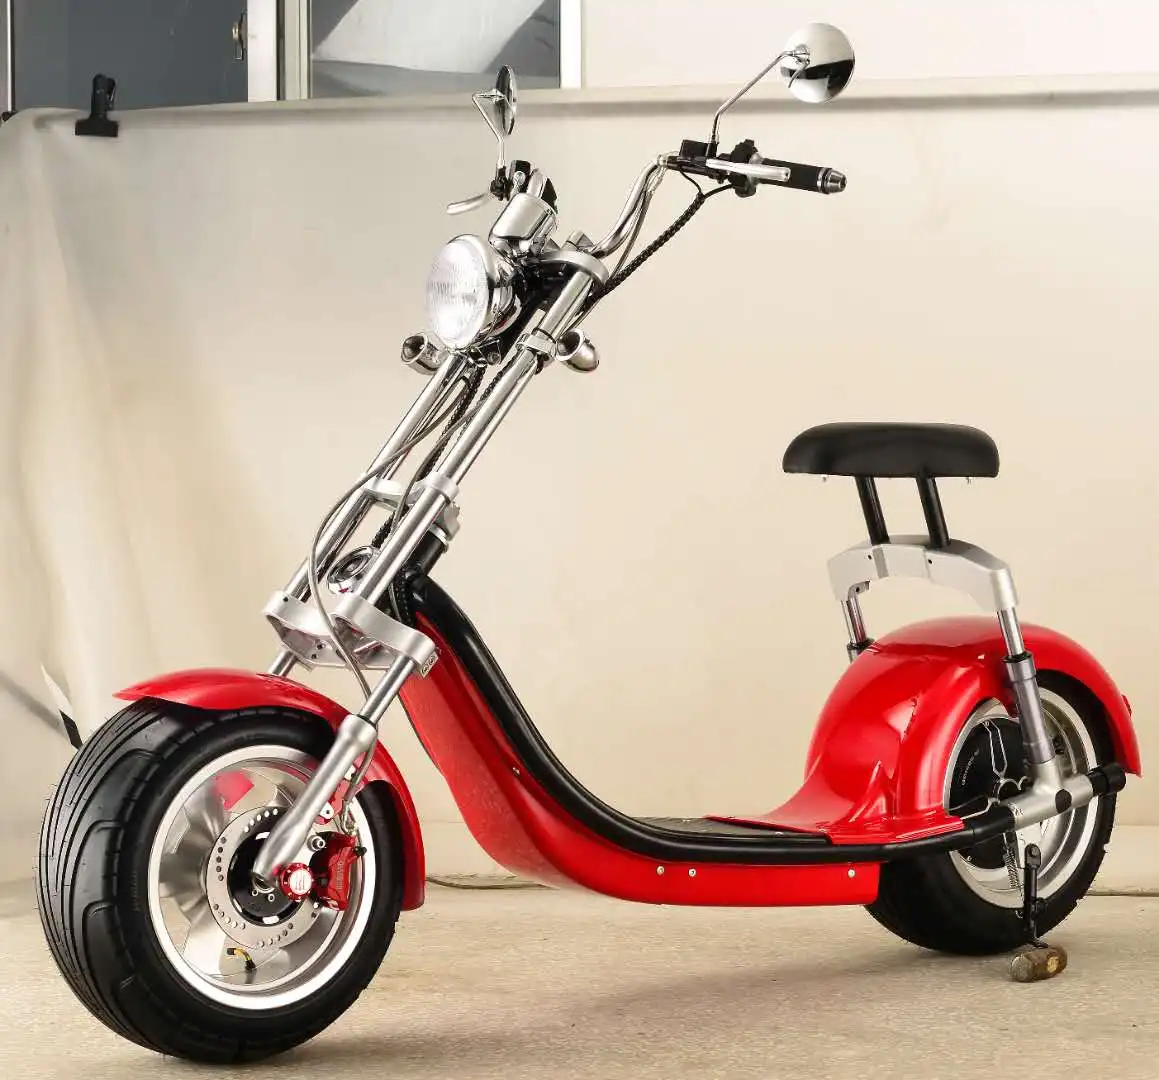 2019 New Design Citycoco Electric Scooter City Coco Electric Motorcycle Retro Style Vintage Bike